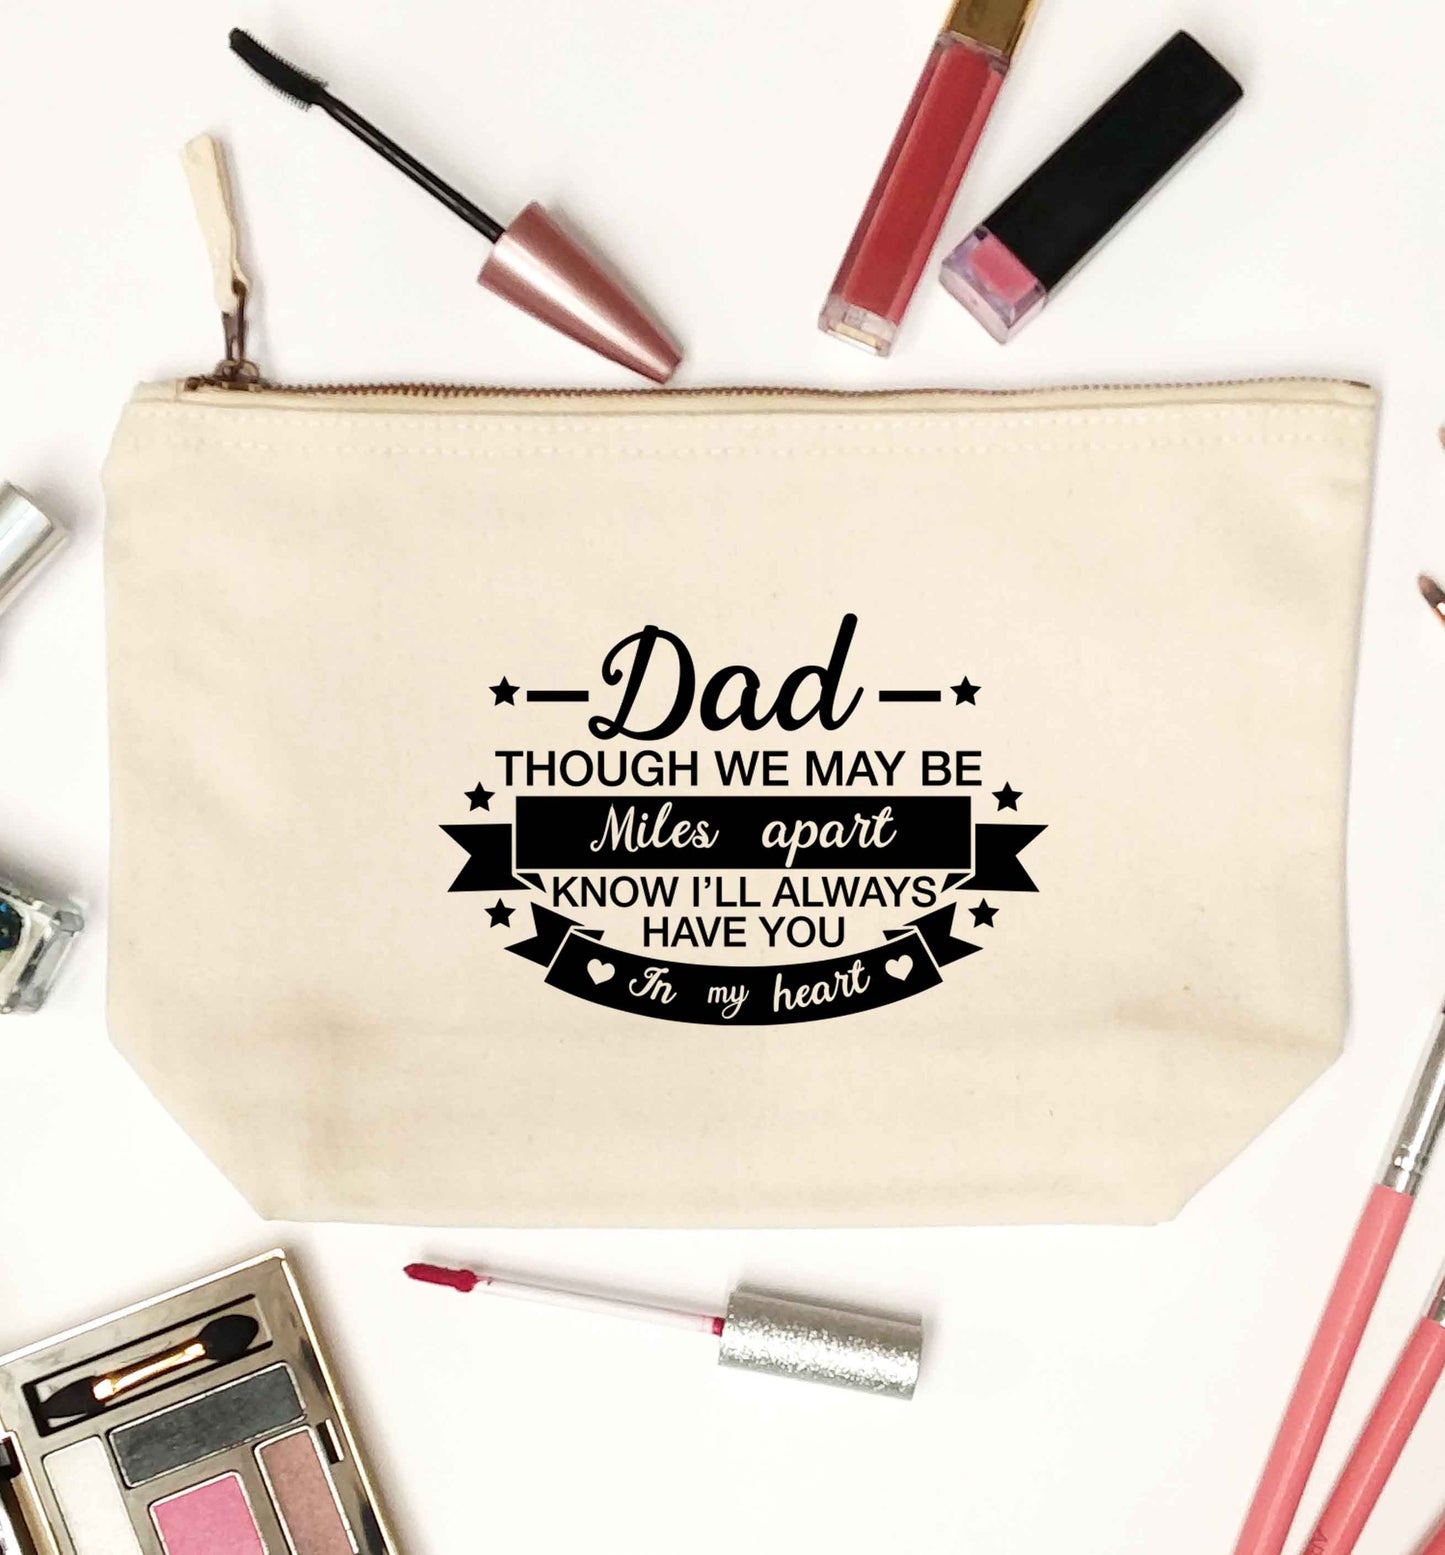 Dad though we are miles apart know I'll always have you in my heart natural makeup bag